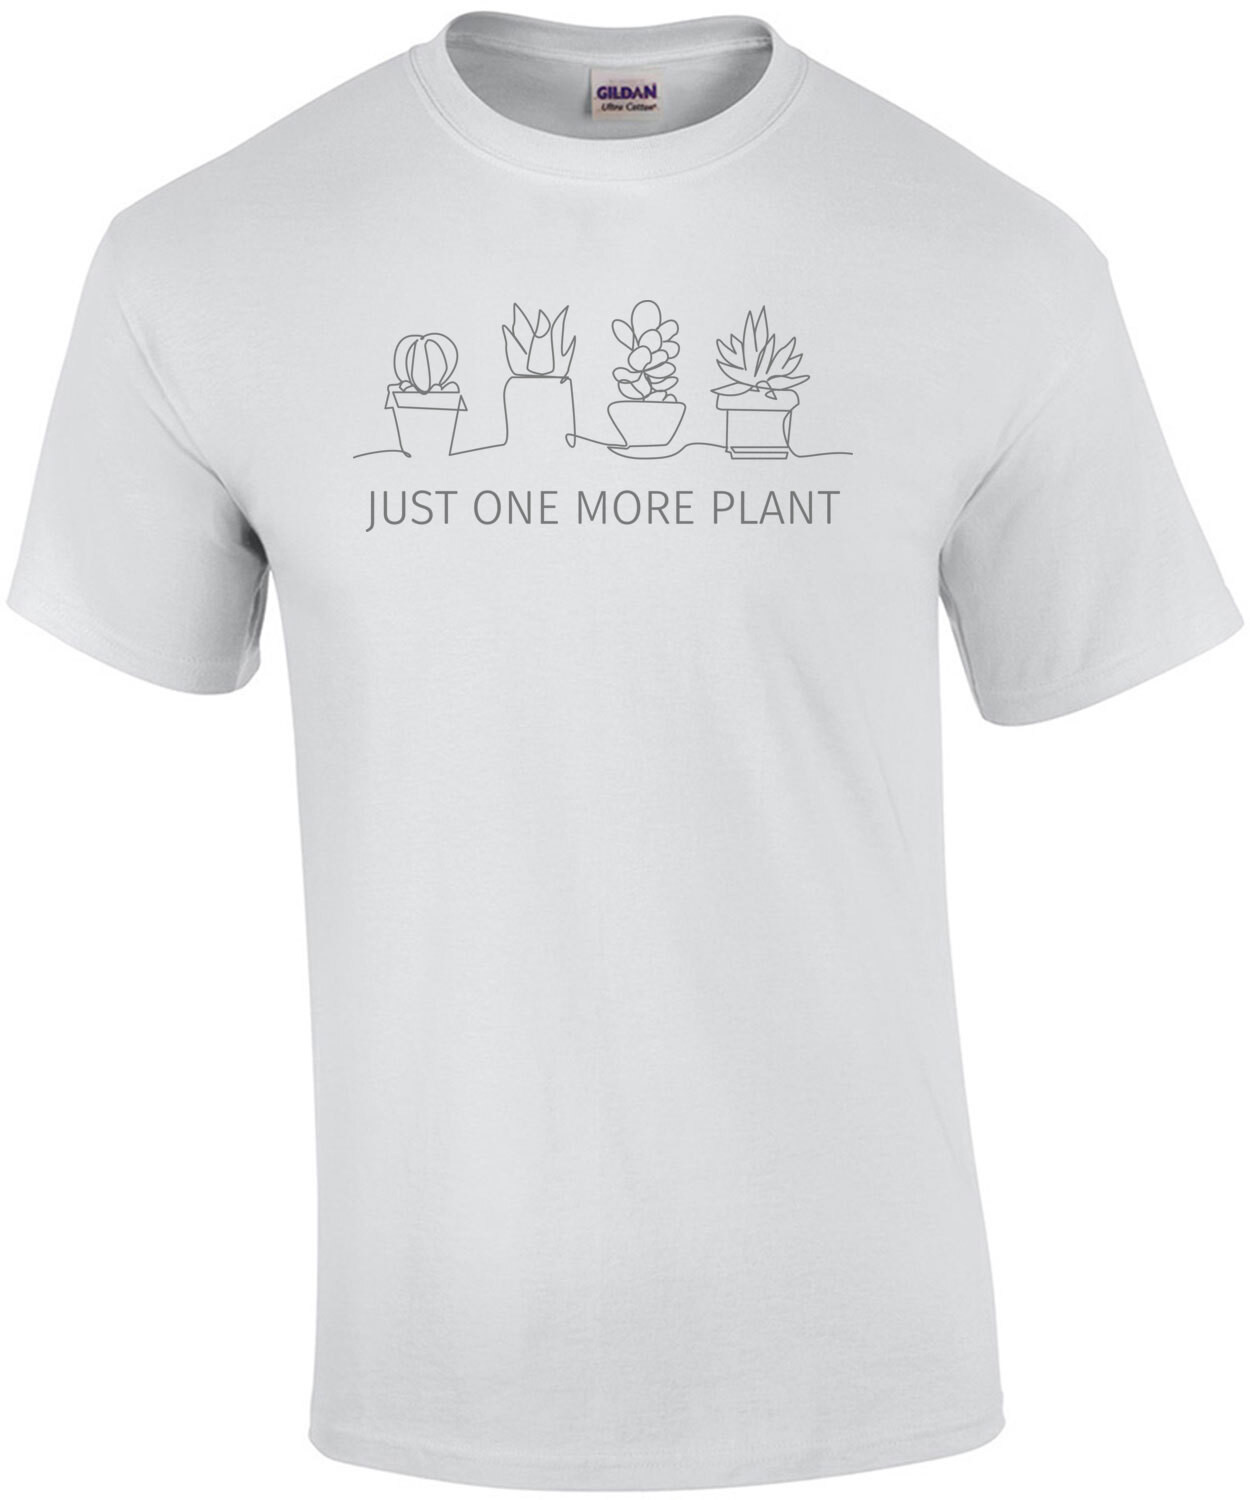 Just One More Plant - You can never have enough plants t-shirt